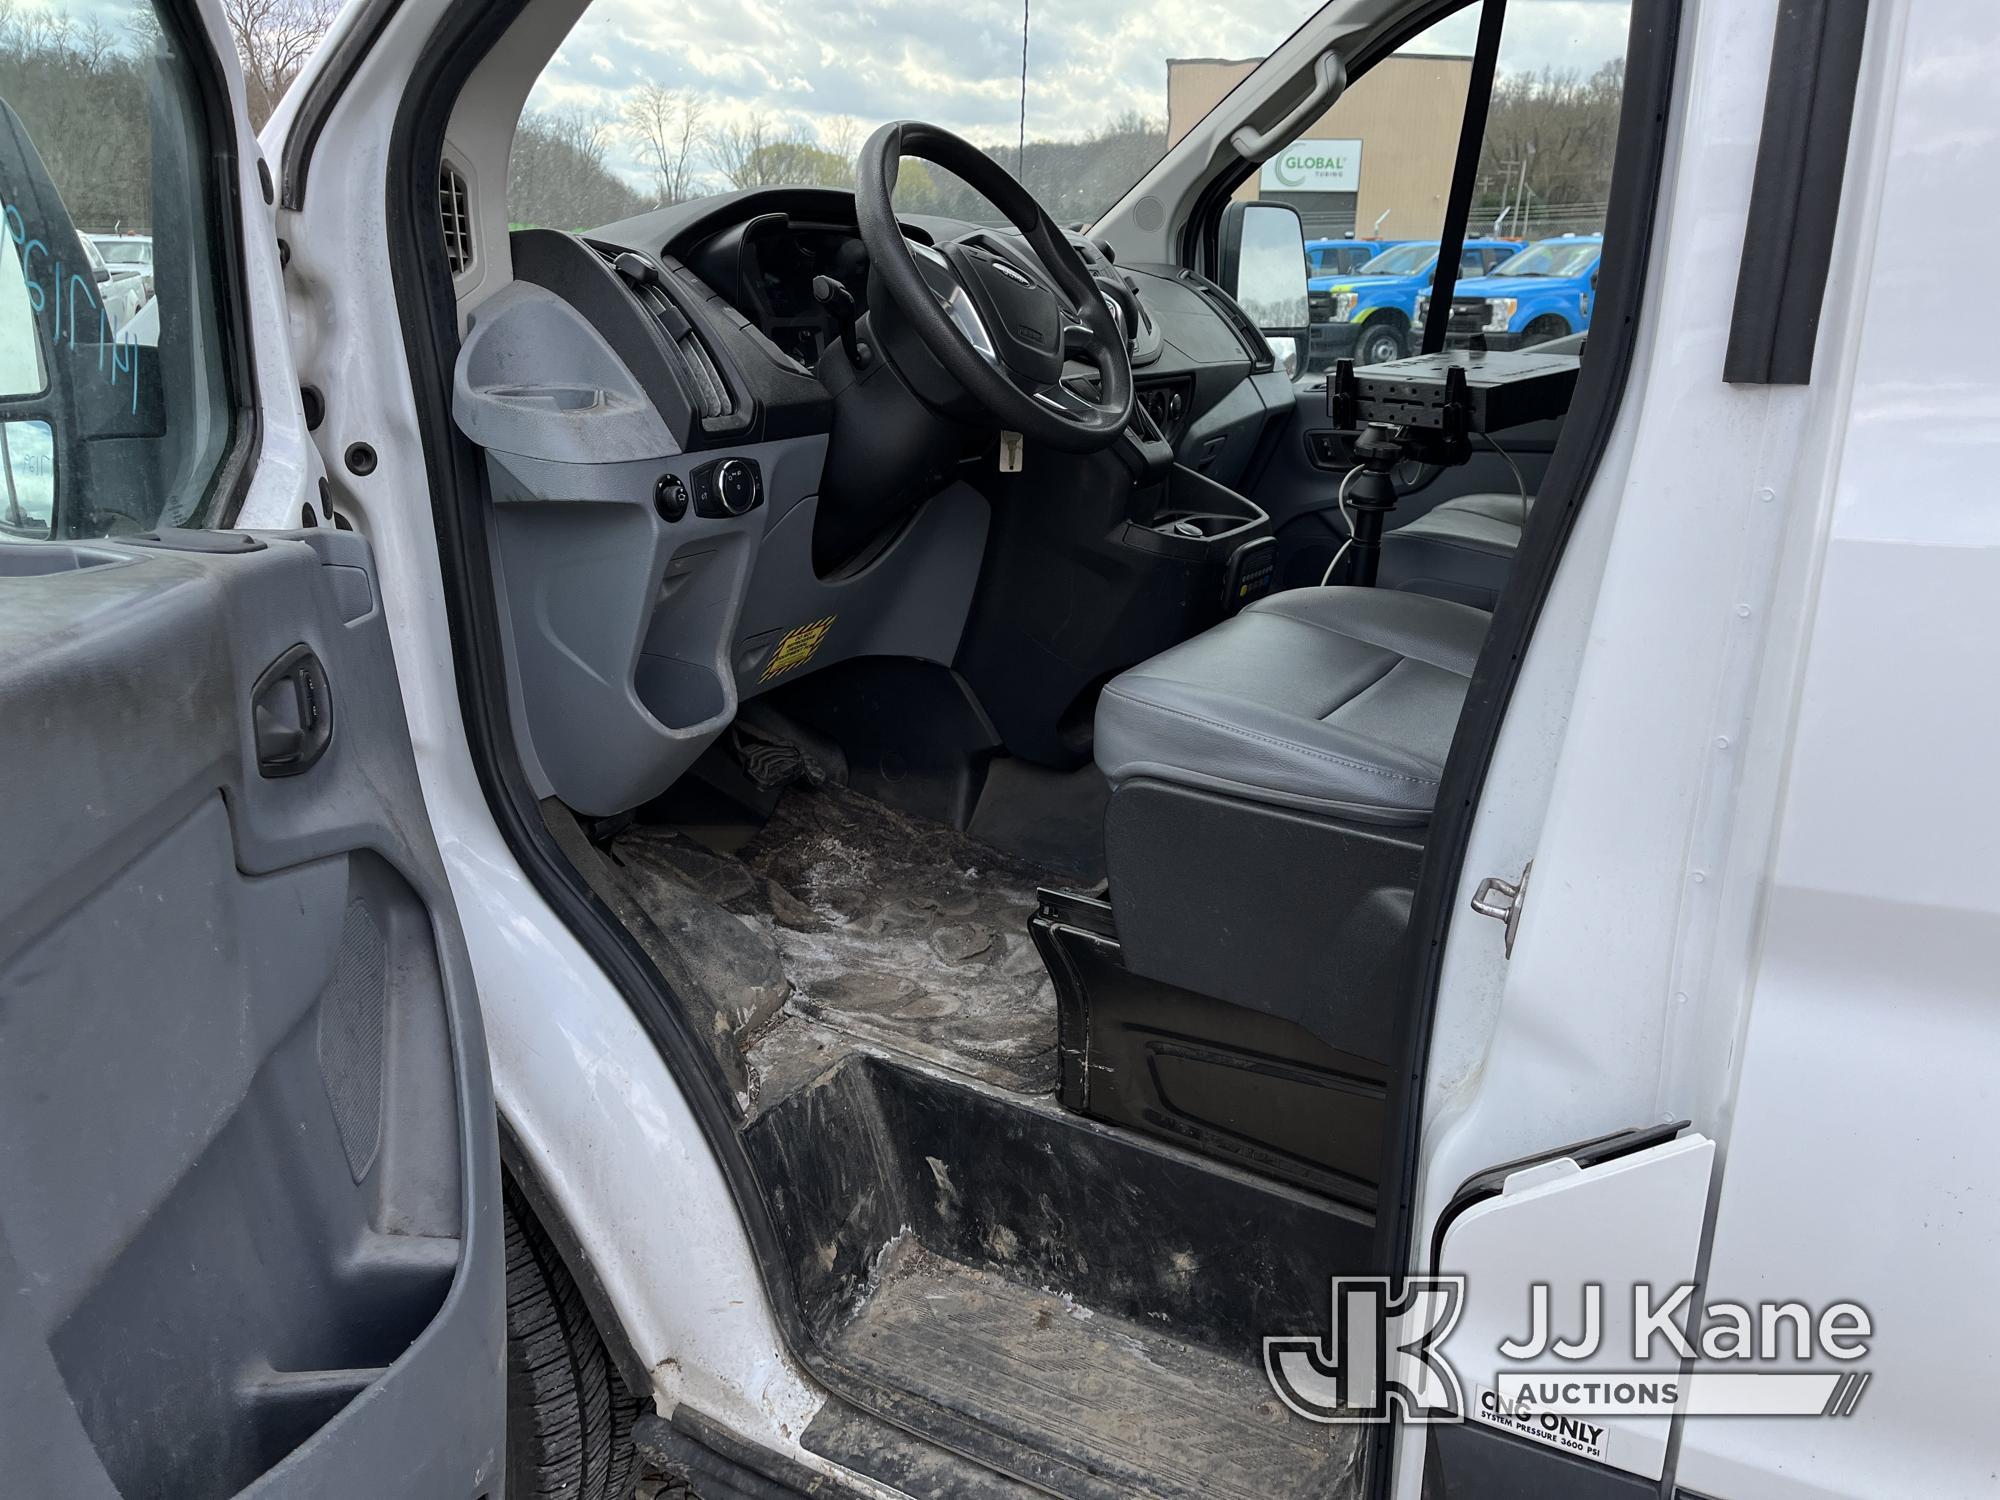 (Smock, PA) 2019 Ford Transit Cargo Van CNG Only) (Runs & Moves, Broken Driver Door Latch Release/Wi